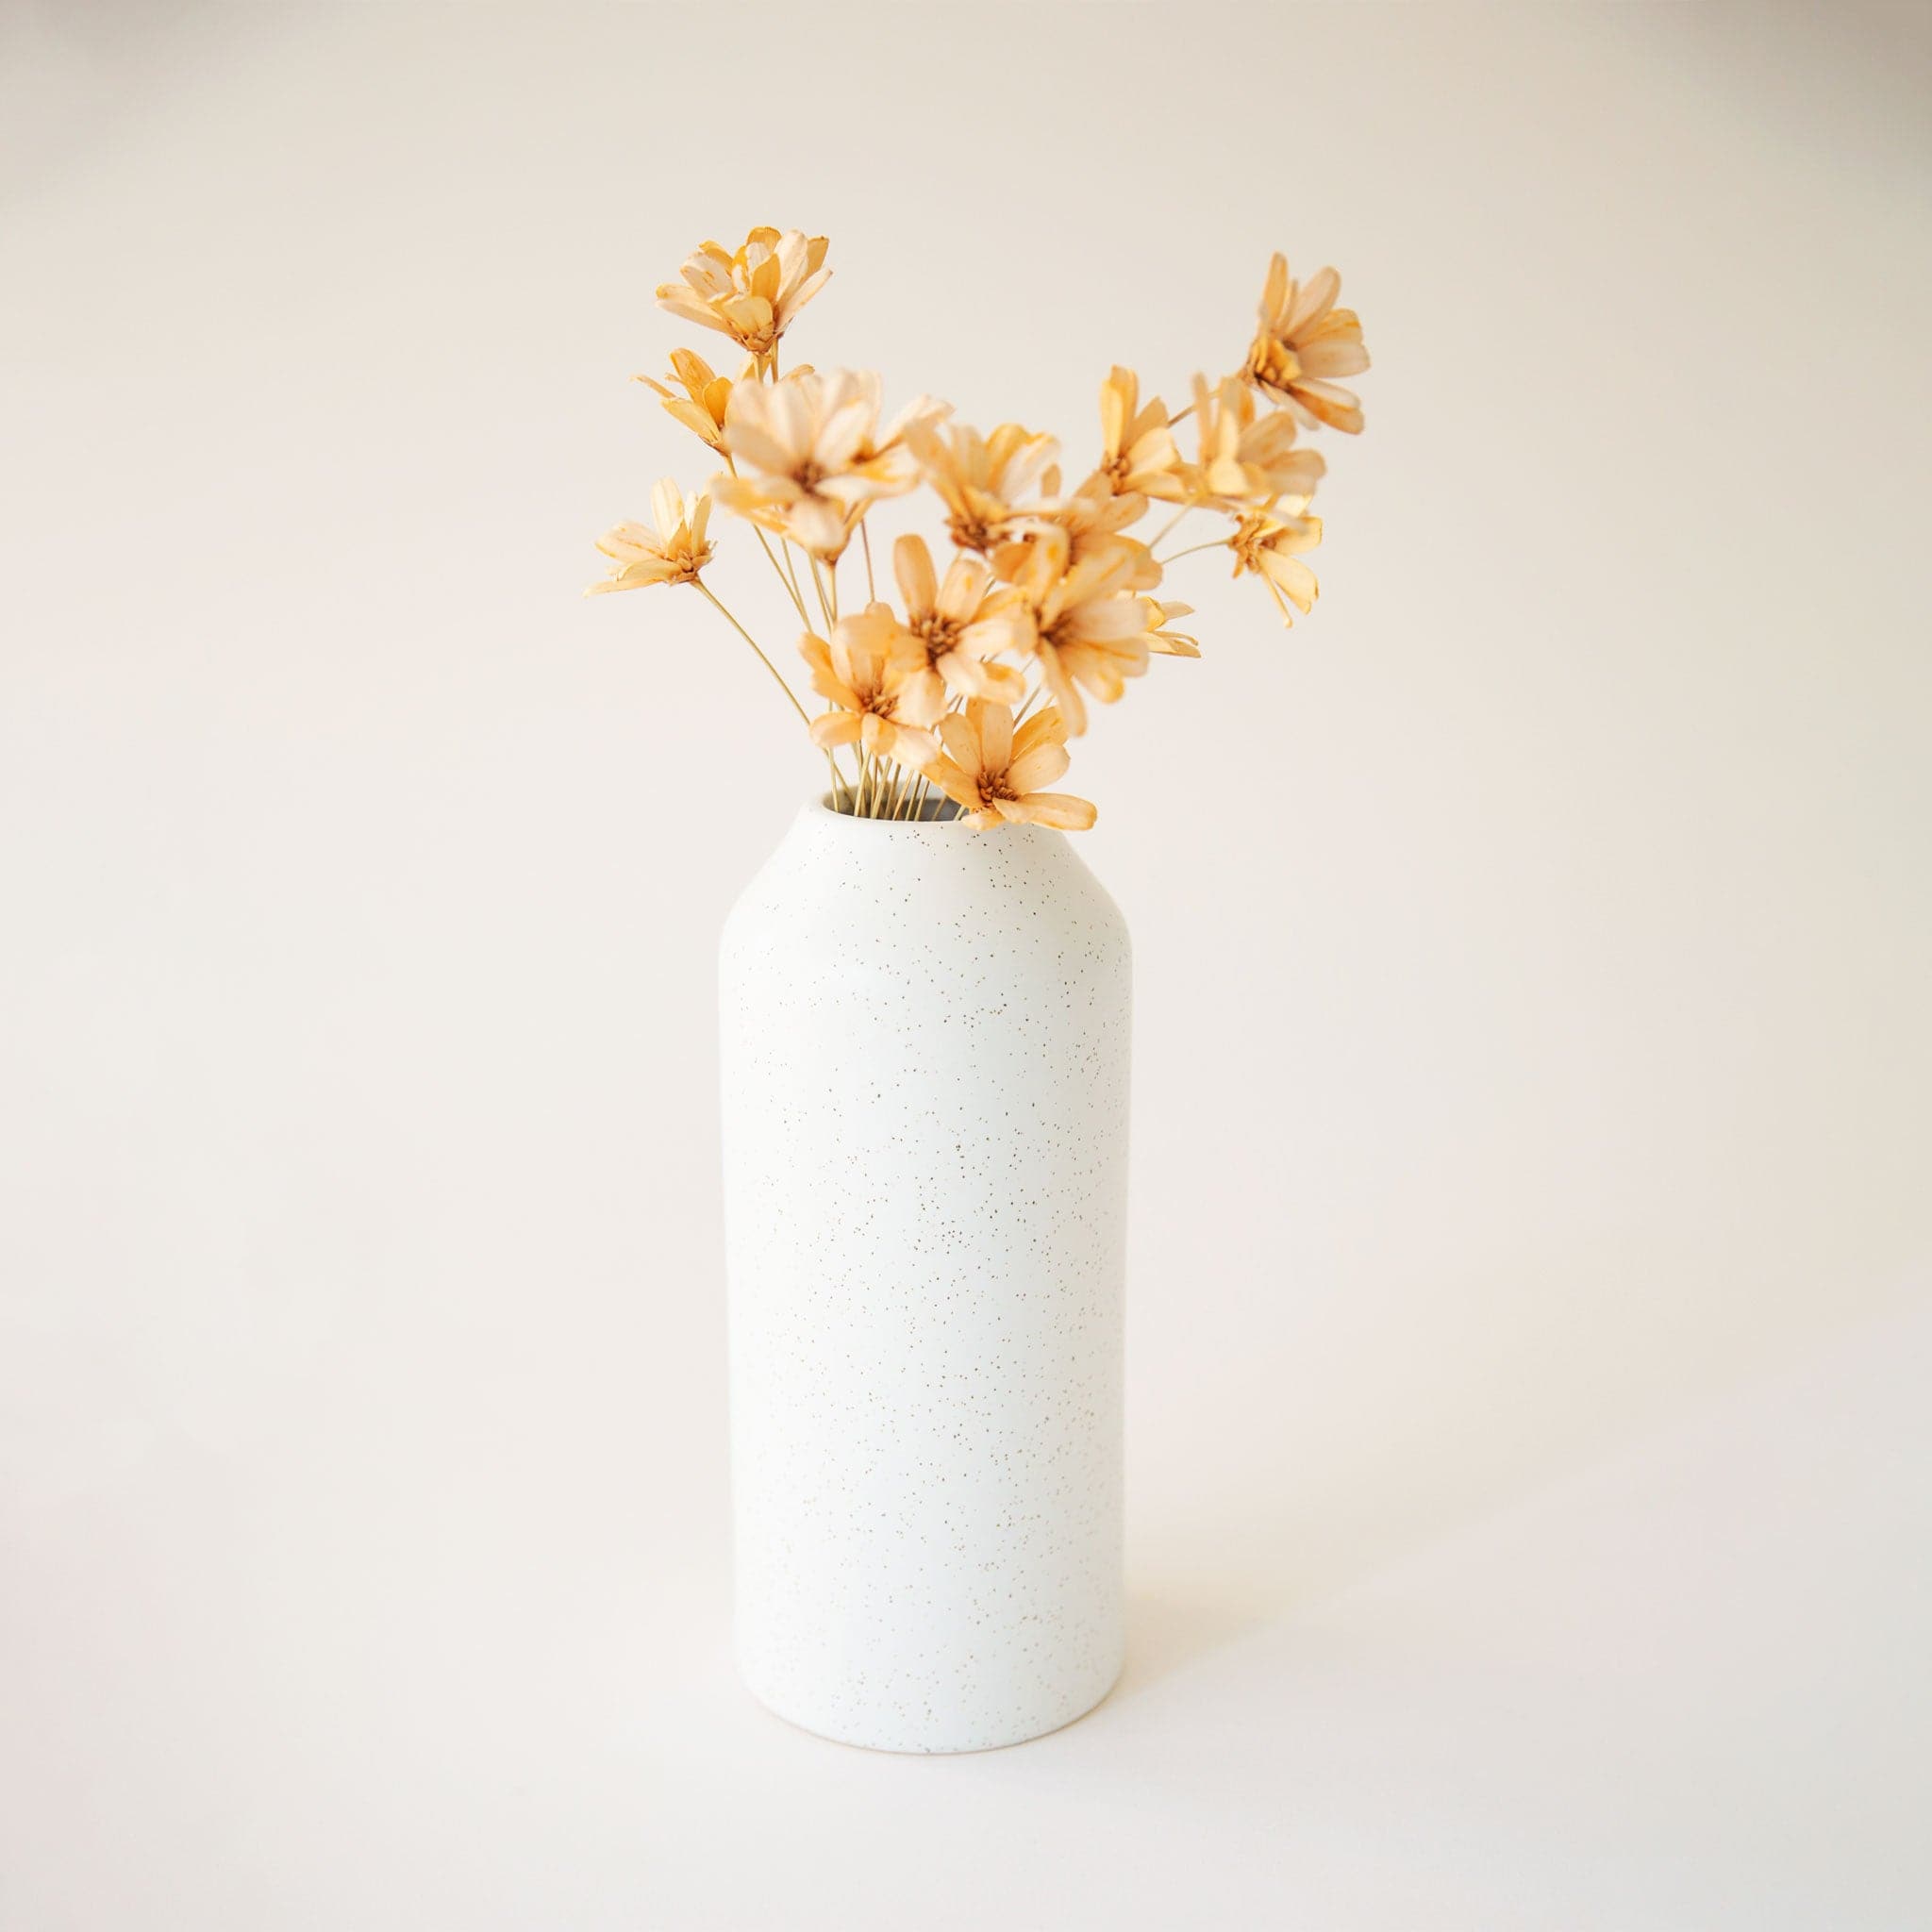 On a cream background is a tall white ceramic vase with an opening at the top and staged with dried florals.